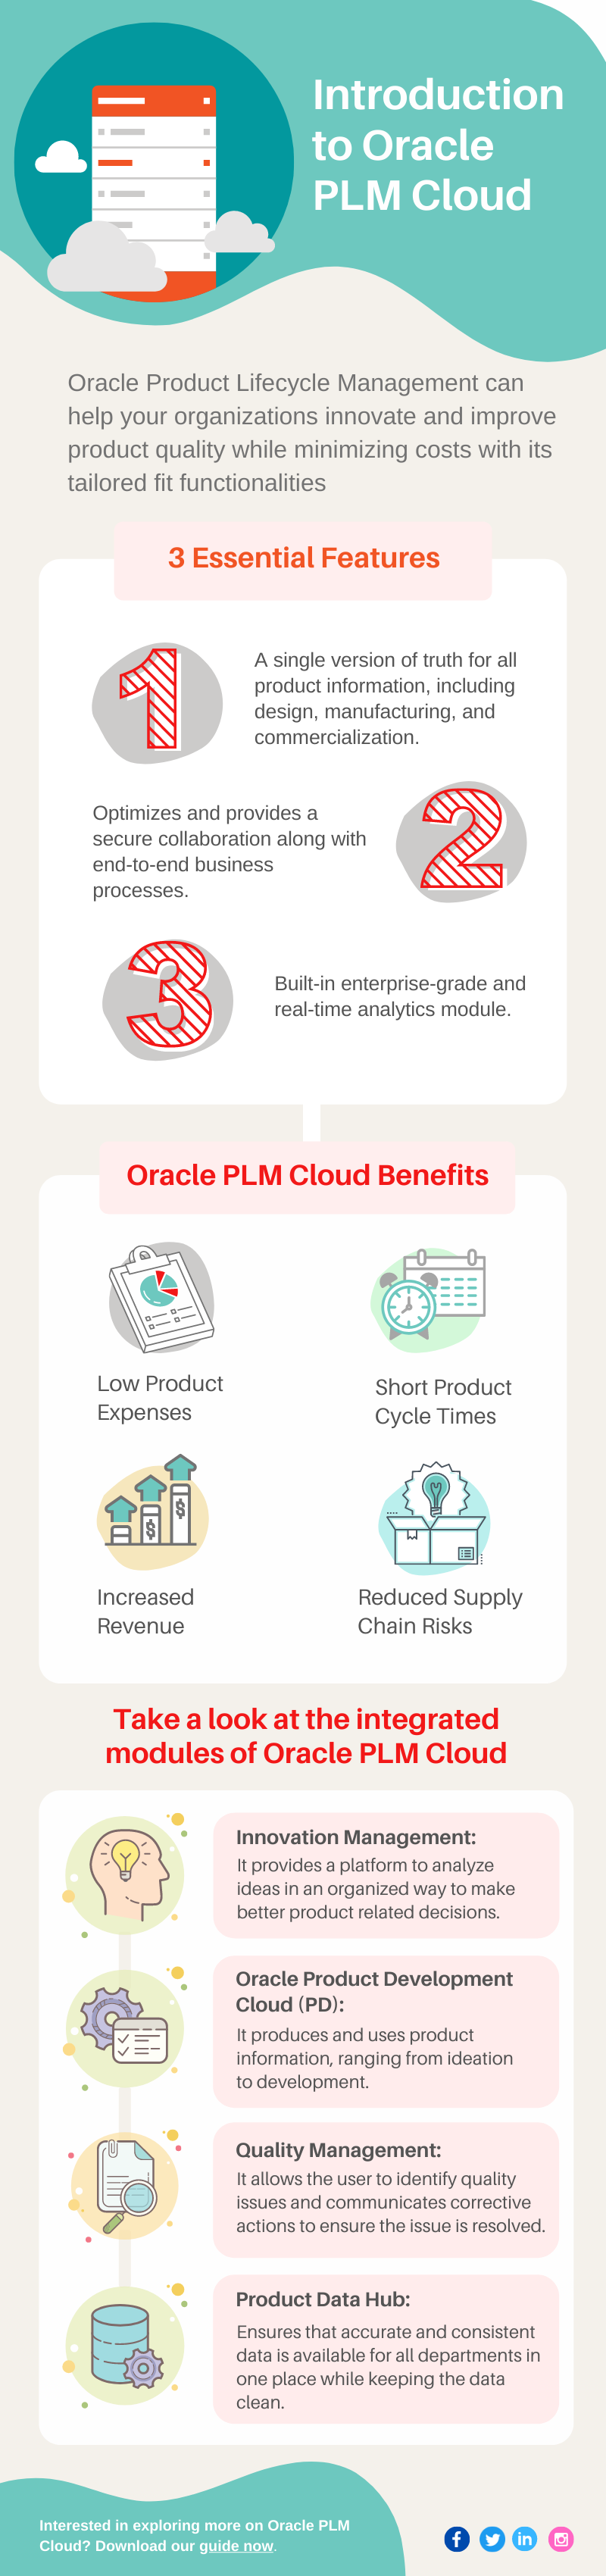 Infographic - Introduction to Oracle PLM Cloud